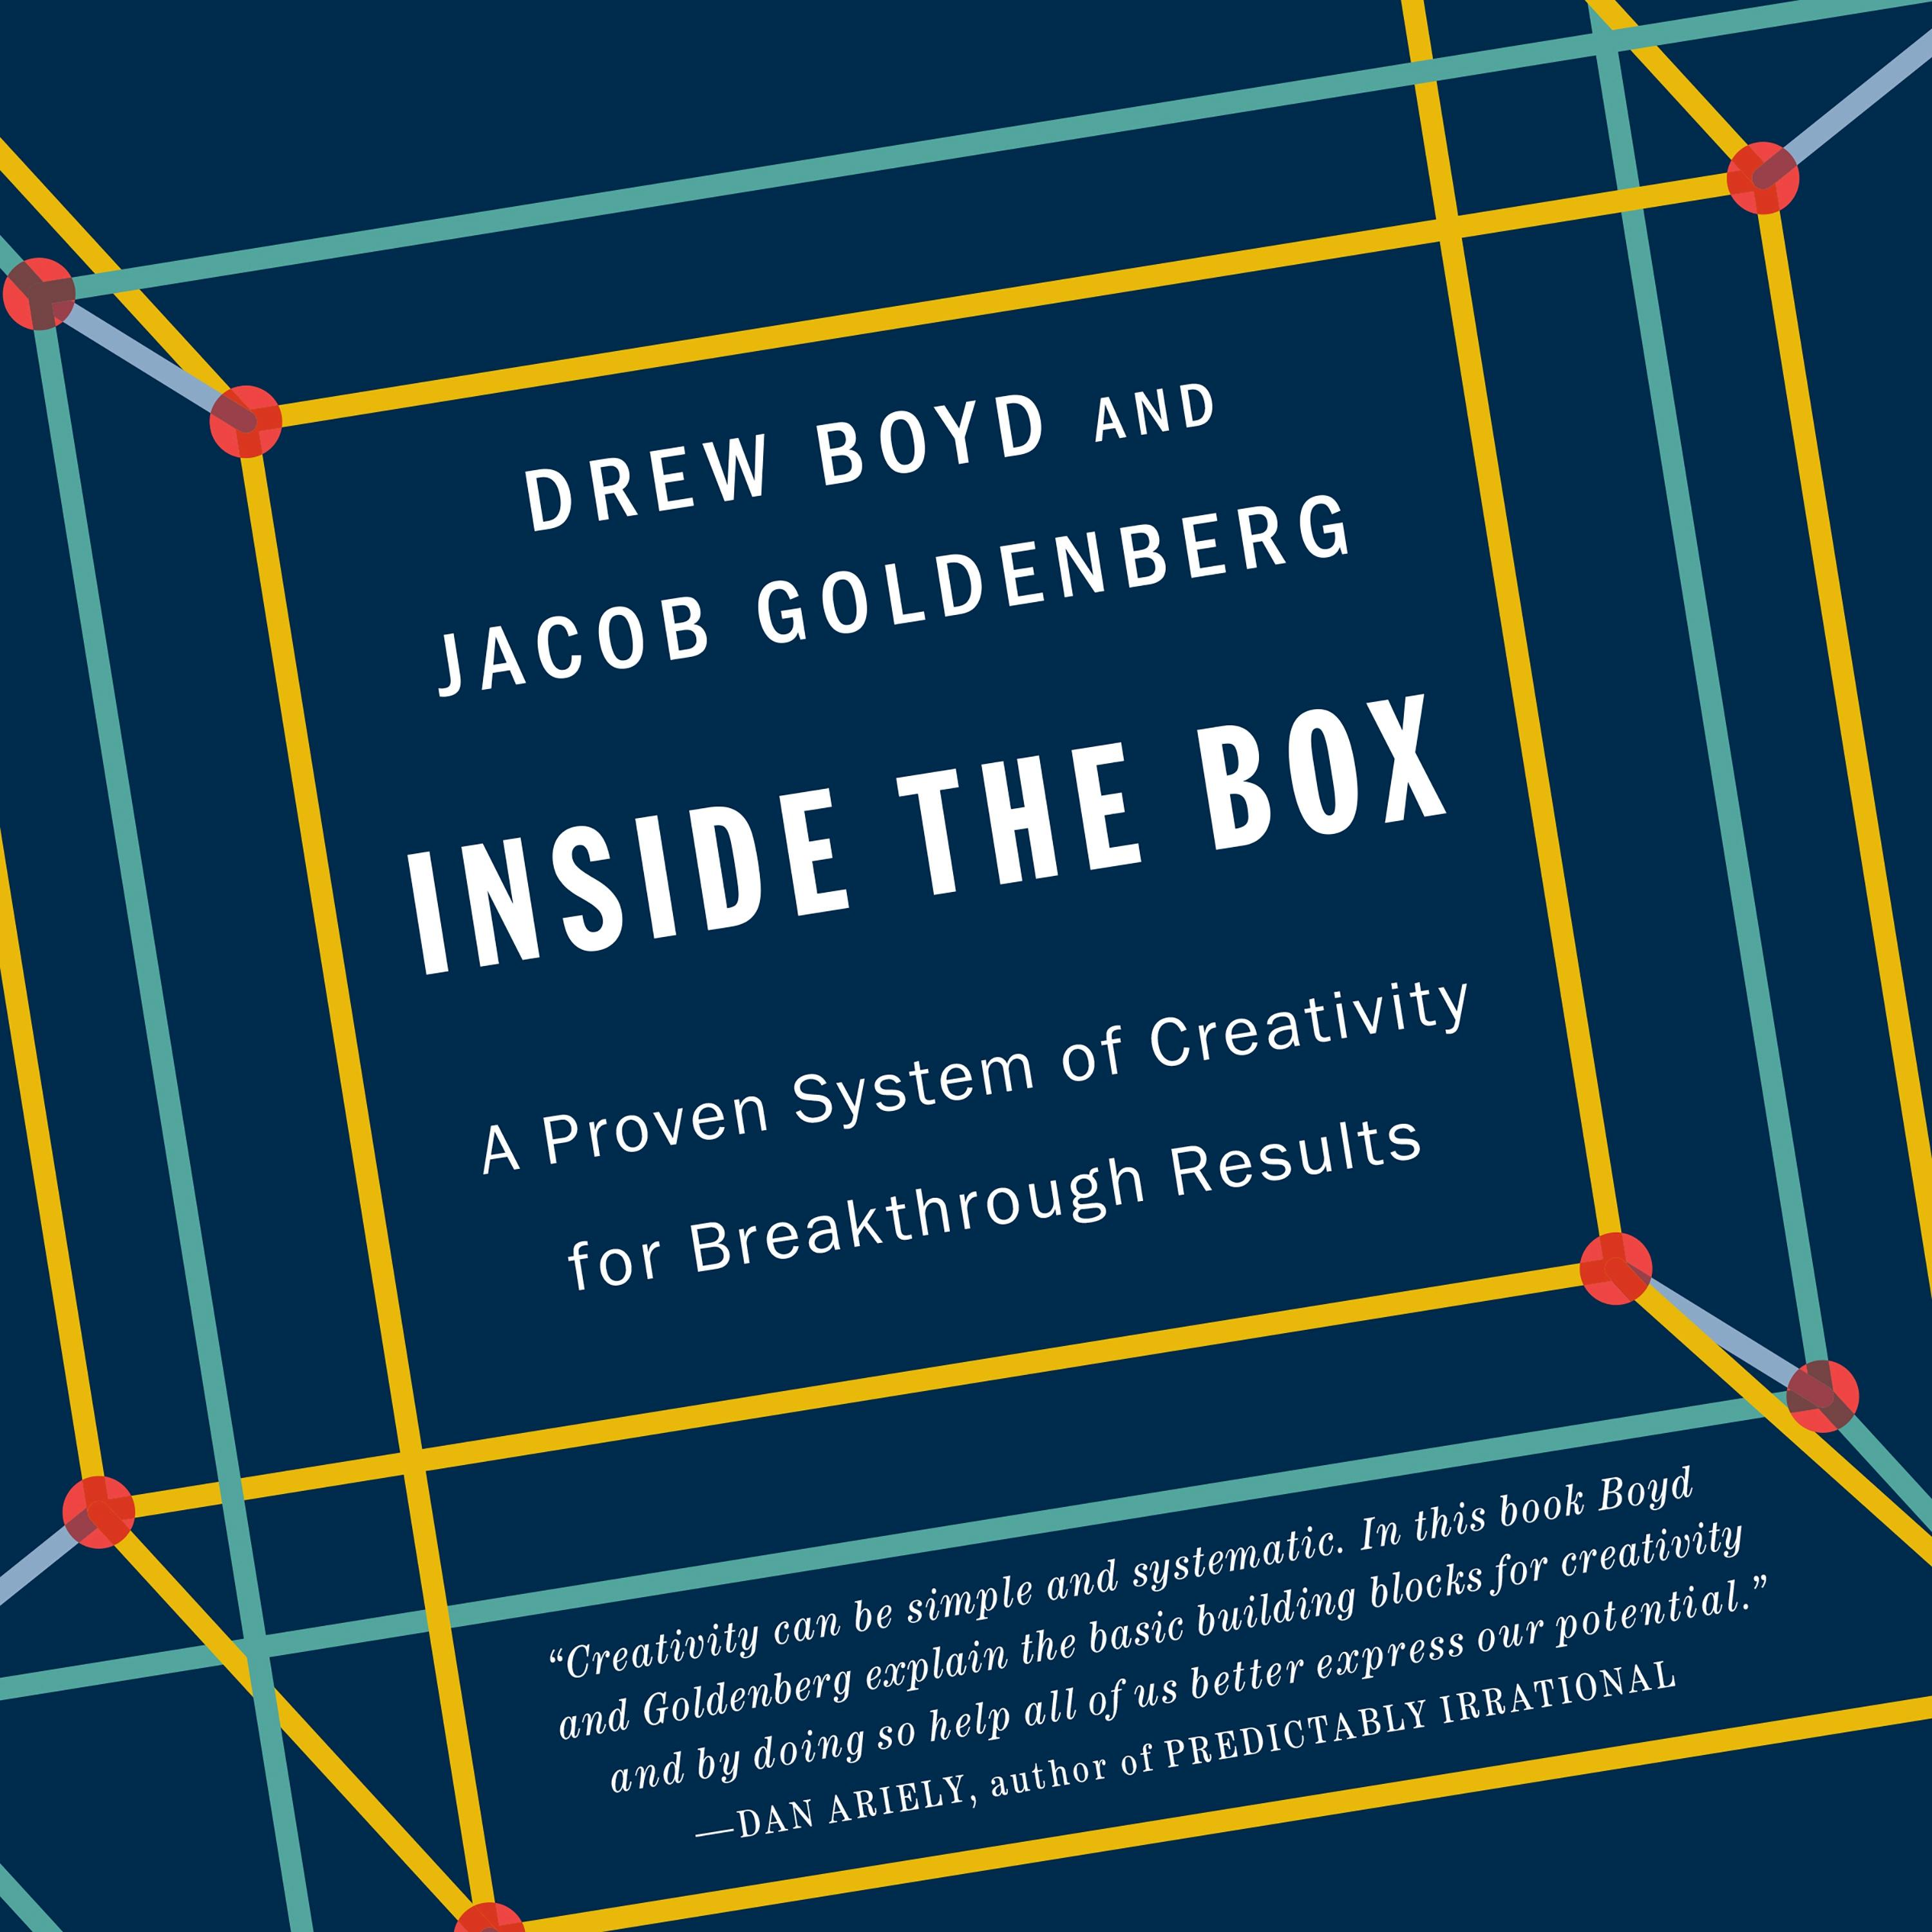 Inside the Box: A Proven System of Creativity for Breakthrough Results - Drew Boyd, Jacob Goldenberg